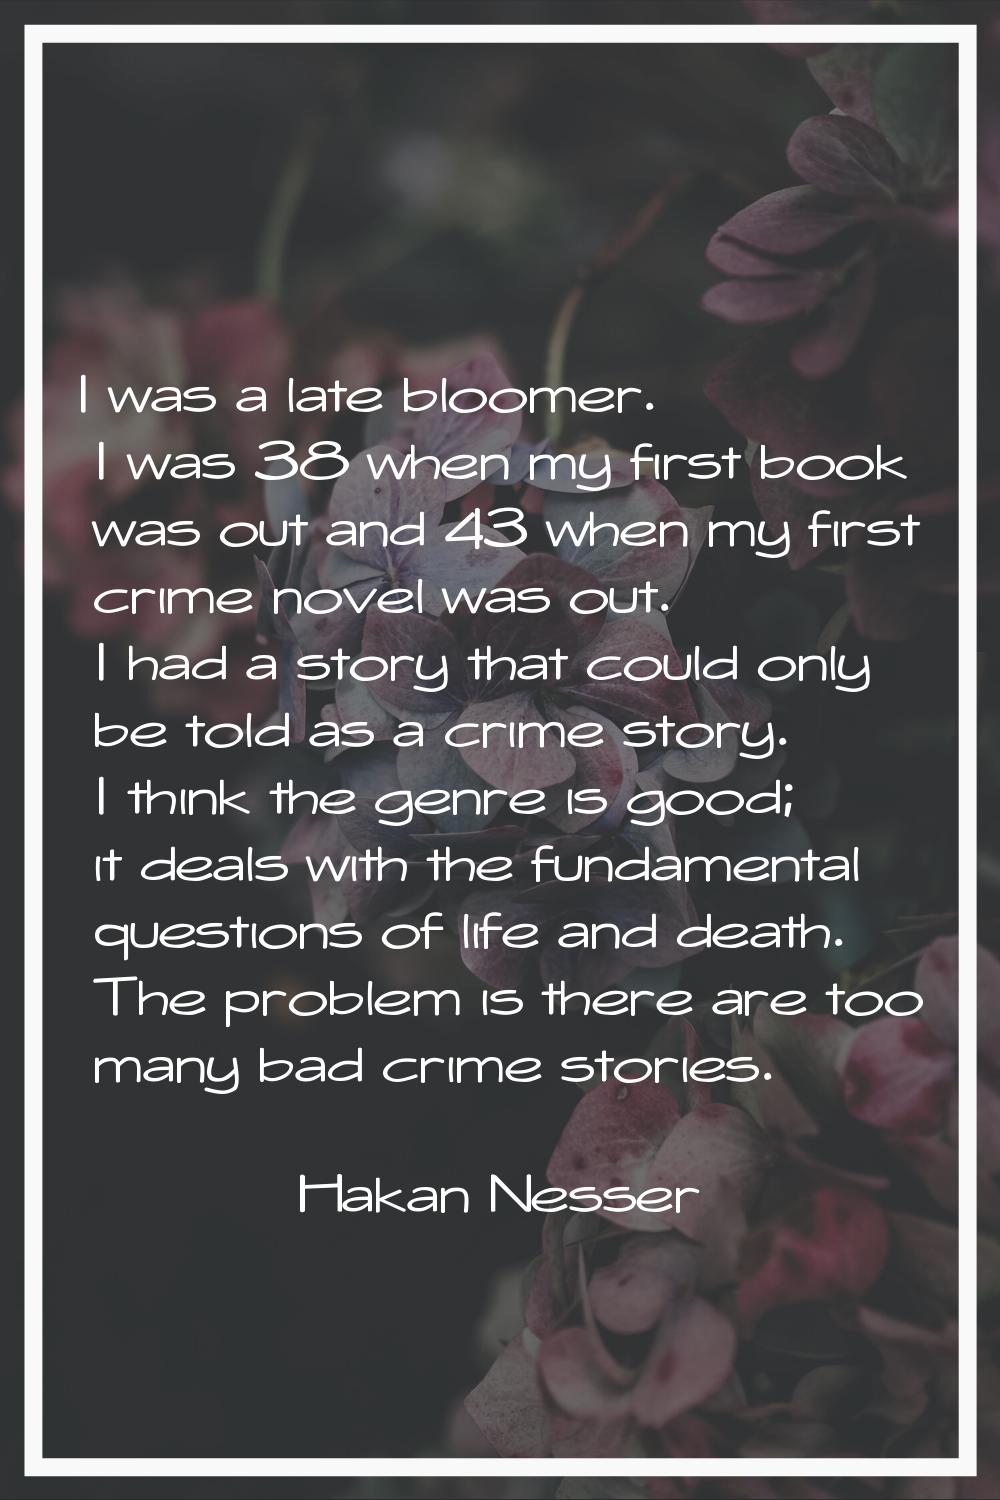 I was a late bloomer. I was 38 when my first book was out and 43 when my first crime novel was out.